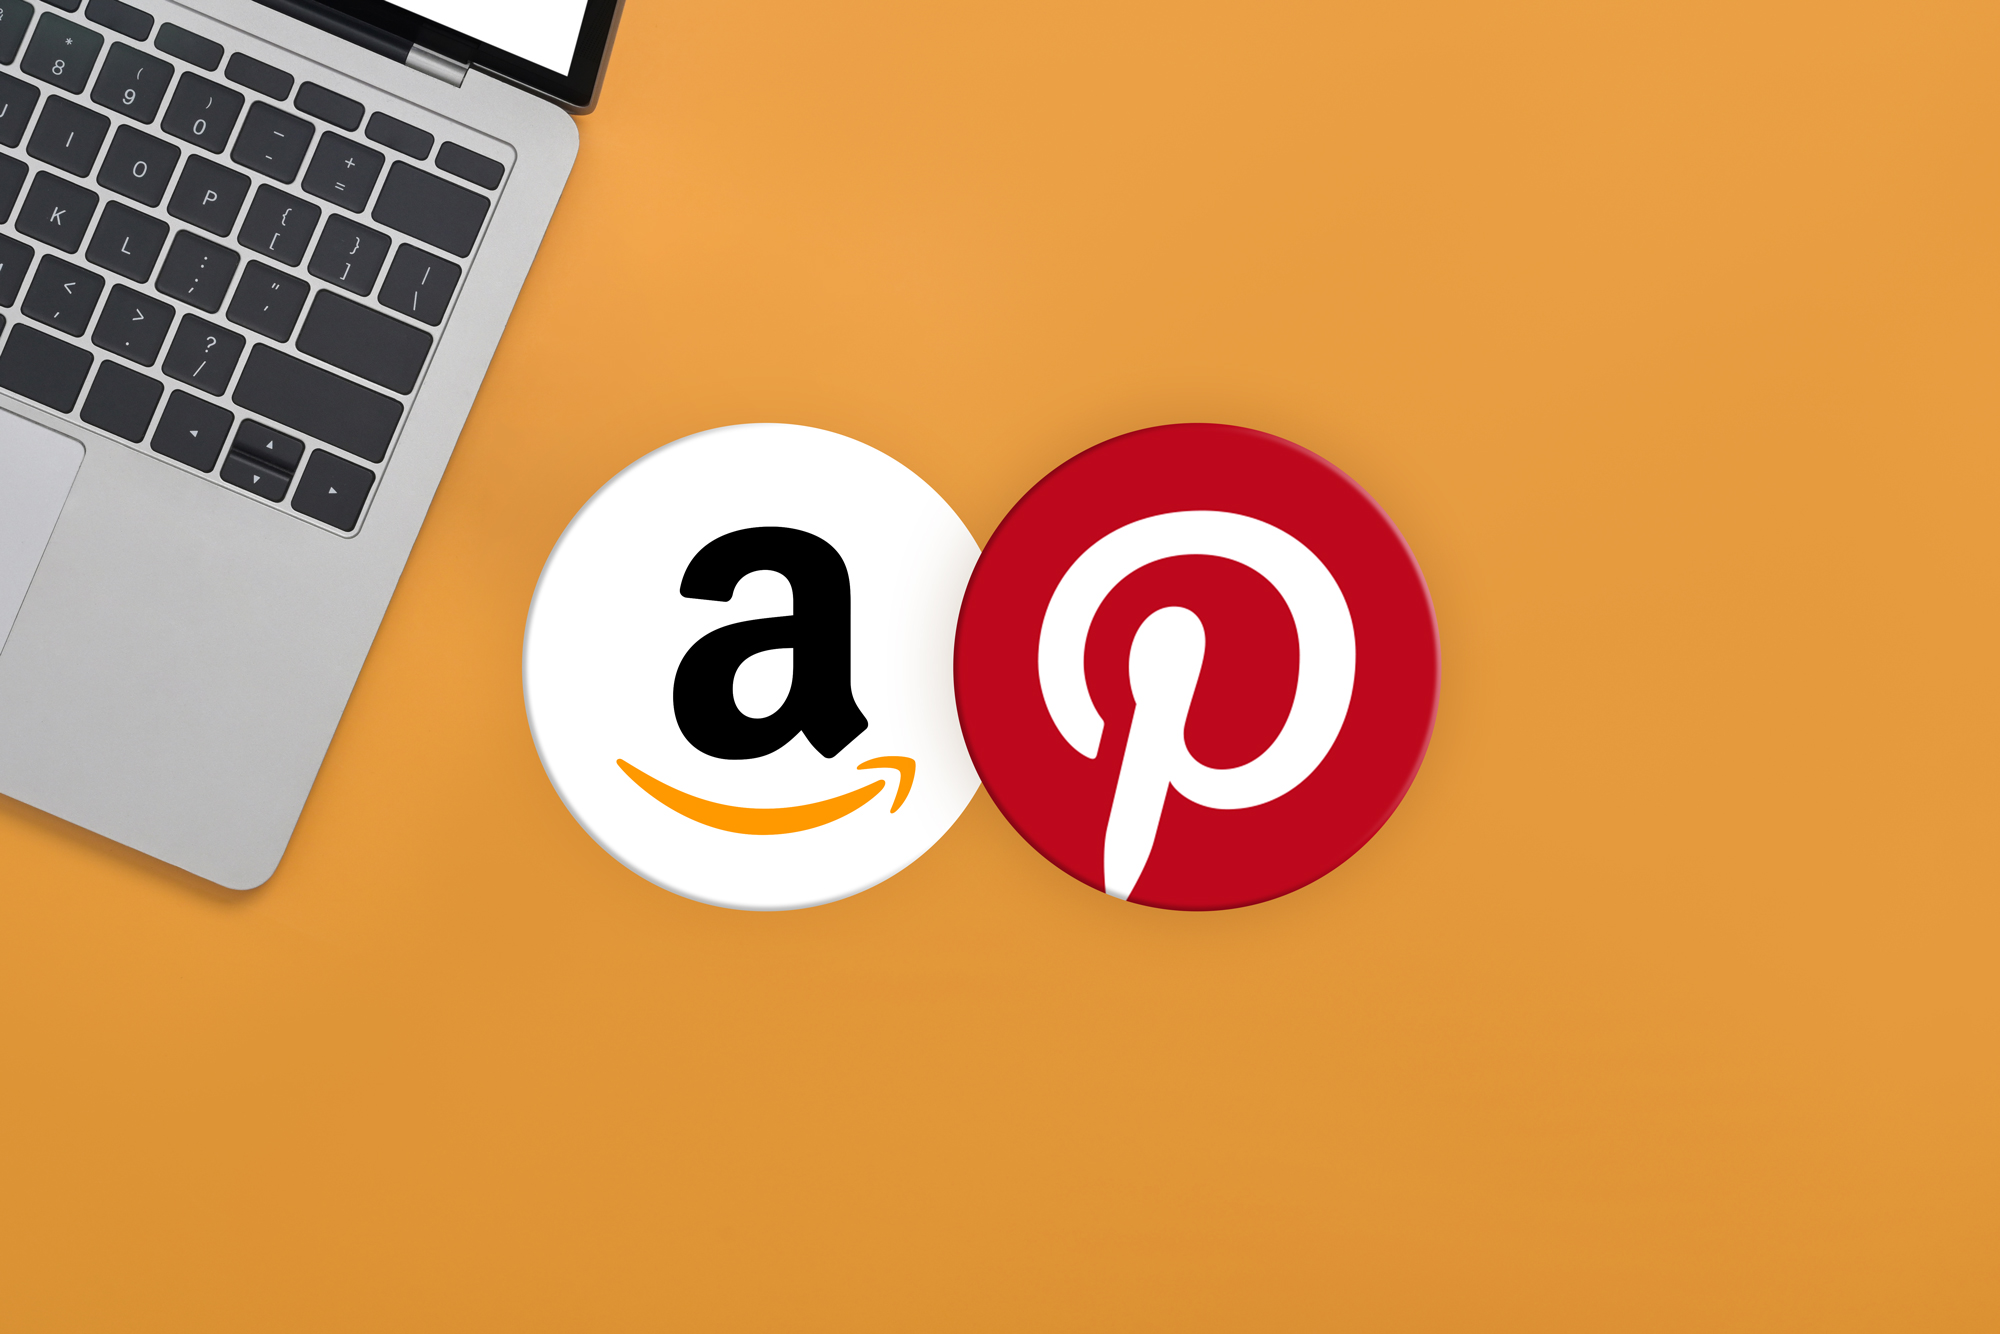 Pin It To Win It: Pinterest & Amazon Team Up For Ad-tastic Collaboration